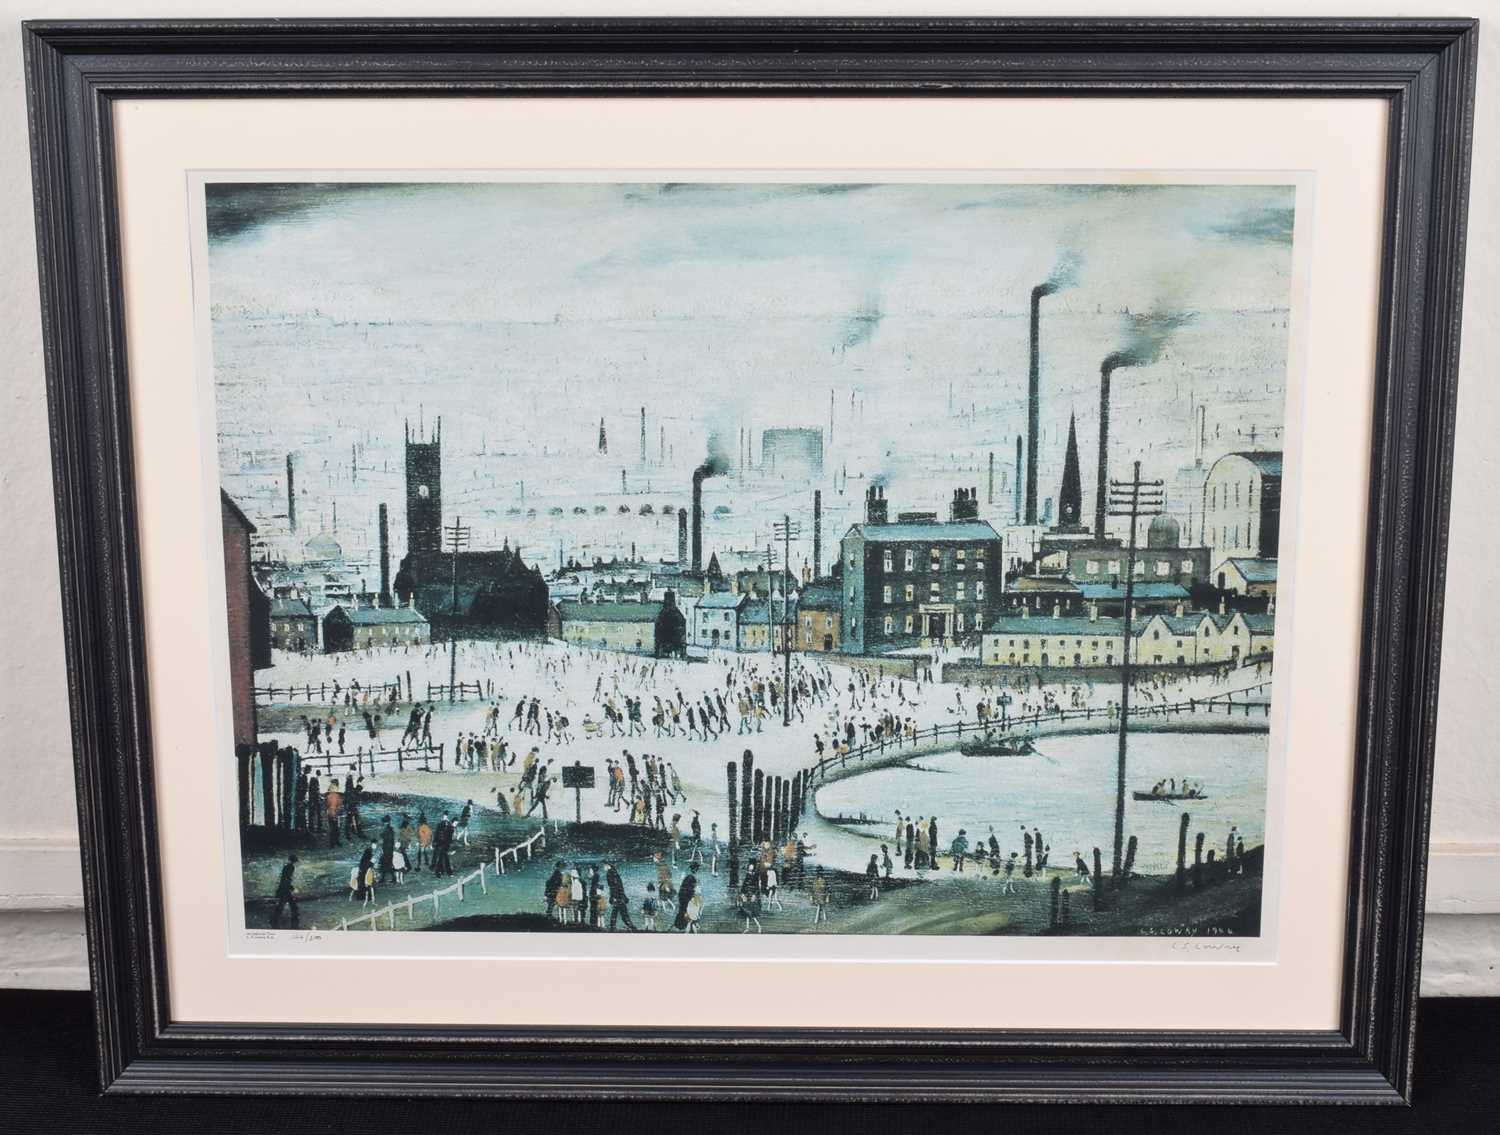 L.S. Lowry R.A. (British 1887-1976) "An Industrial Town", signed print. - Image 2 of 2